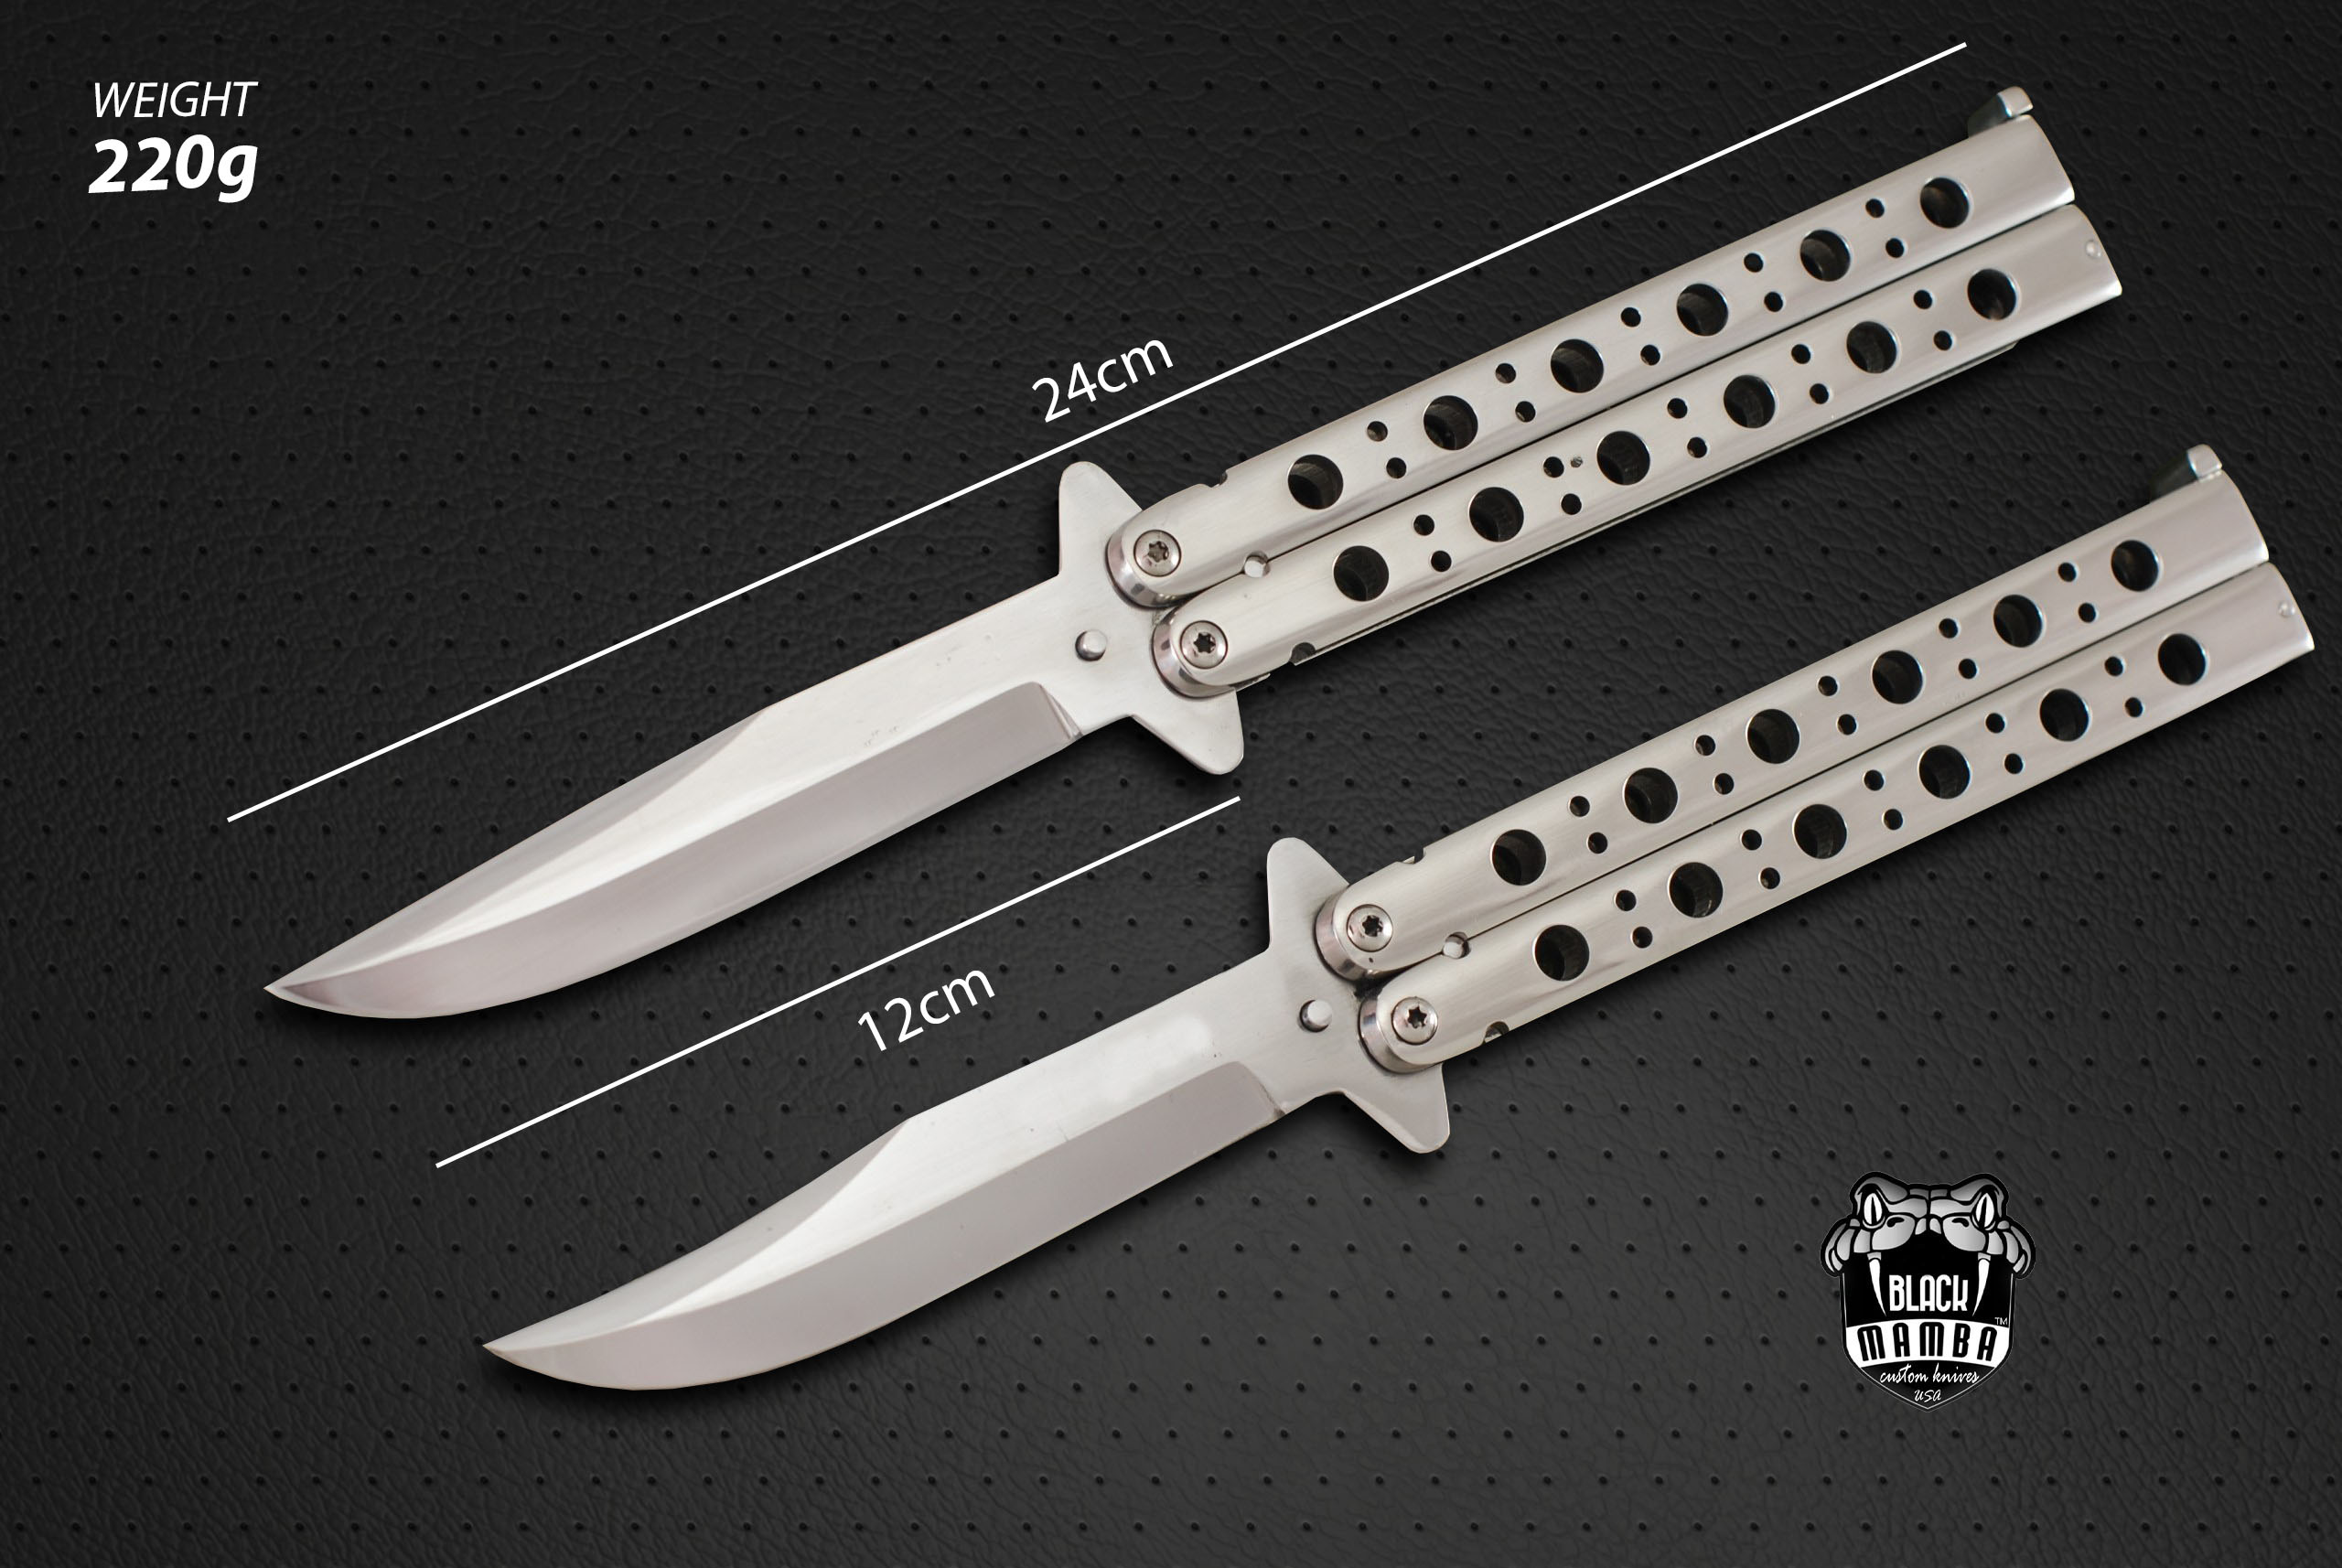 Broom dinosaurus Erobrer BMK-400 Silver spotted 12 Blade High Carbon Balisong butterfly knife USA